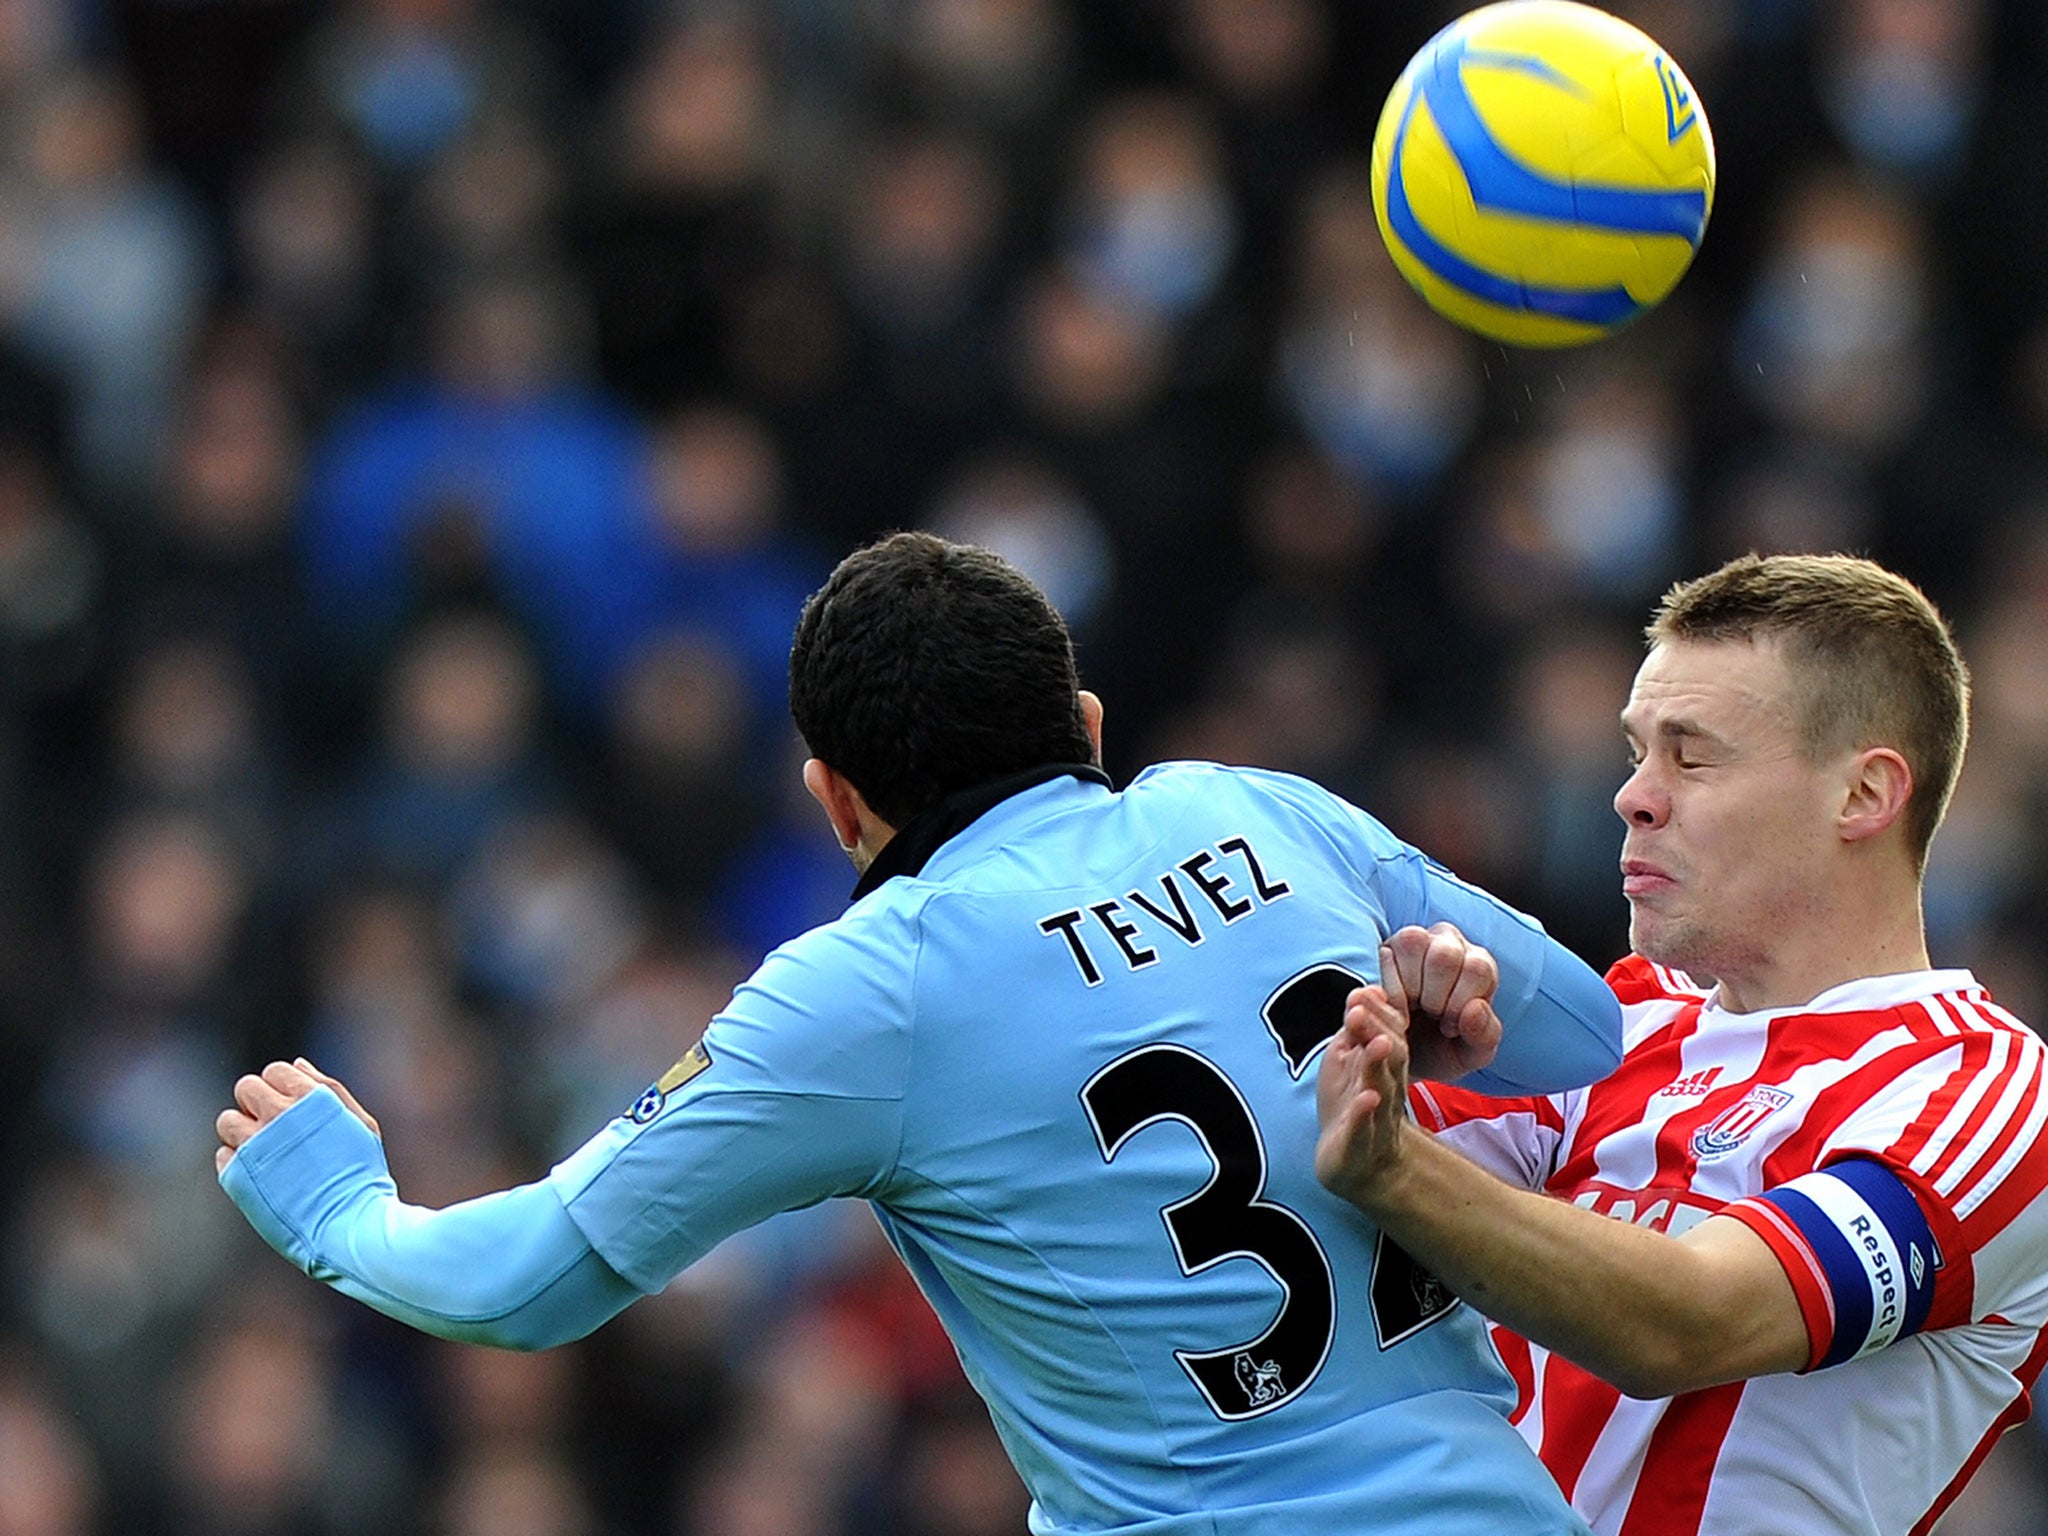 Manchester City's Carlos Tevez tussles with Stoke's Ryan Shawcross for the ball